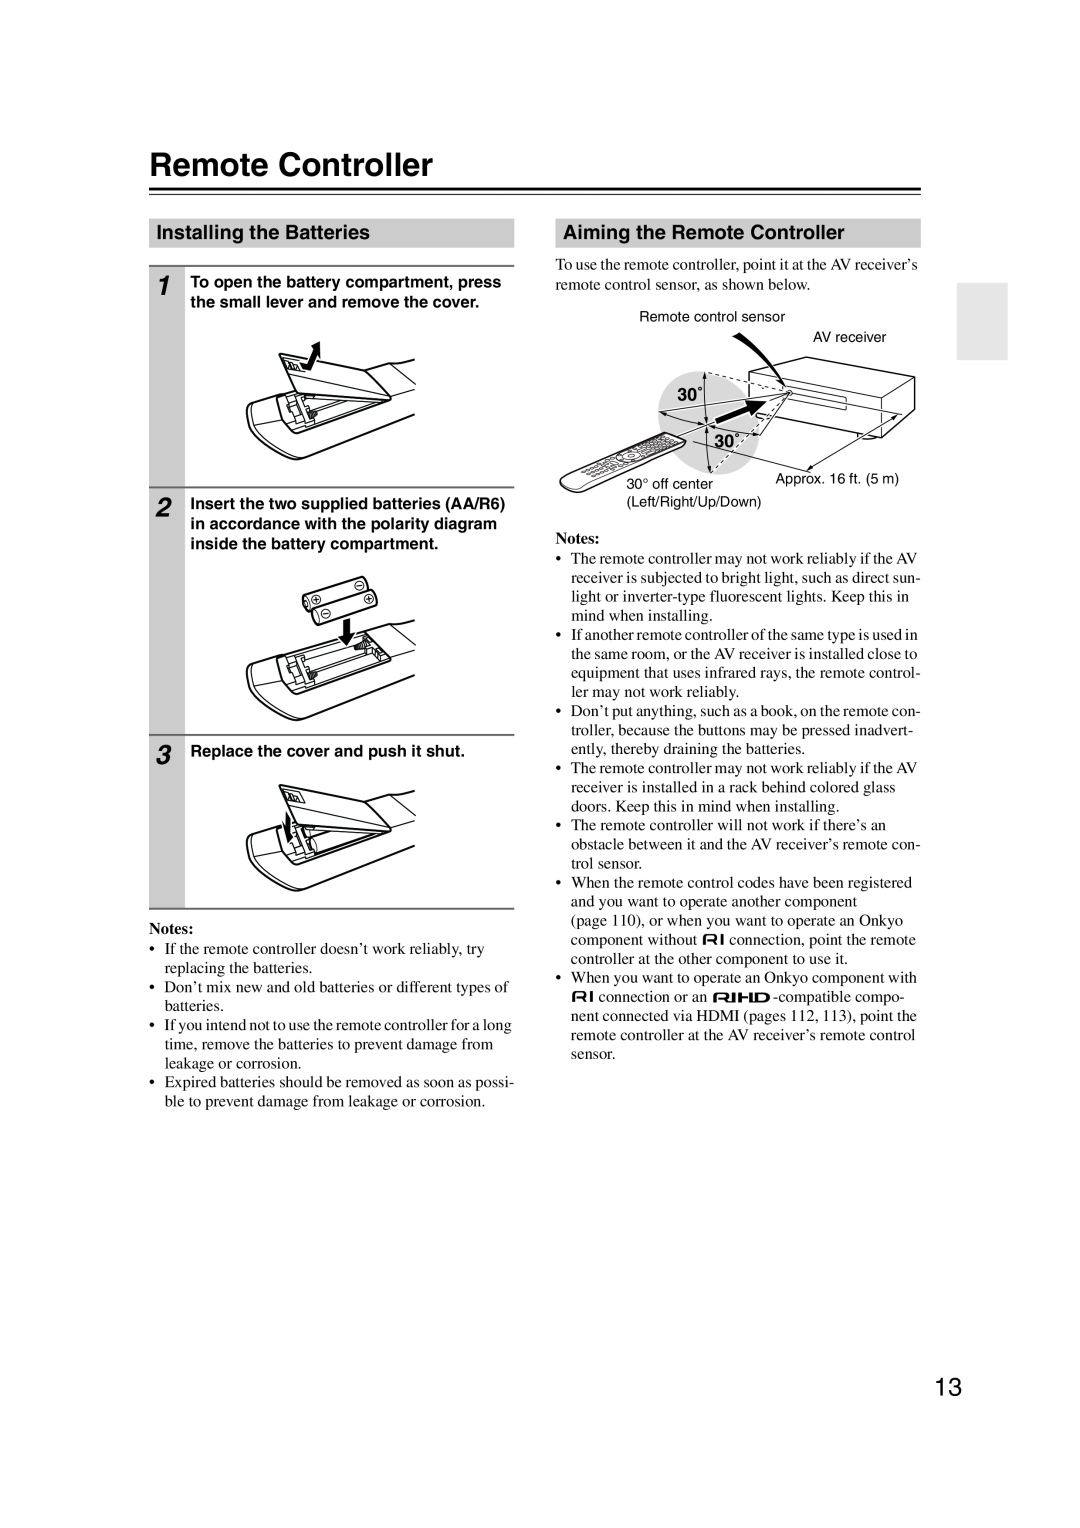 Onkyo TX-SR707 instruction manual Installing the Batteries, Aiming the Remote Controller, Notes 